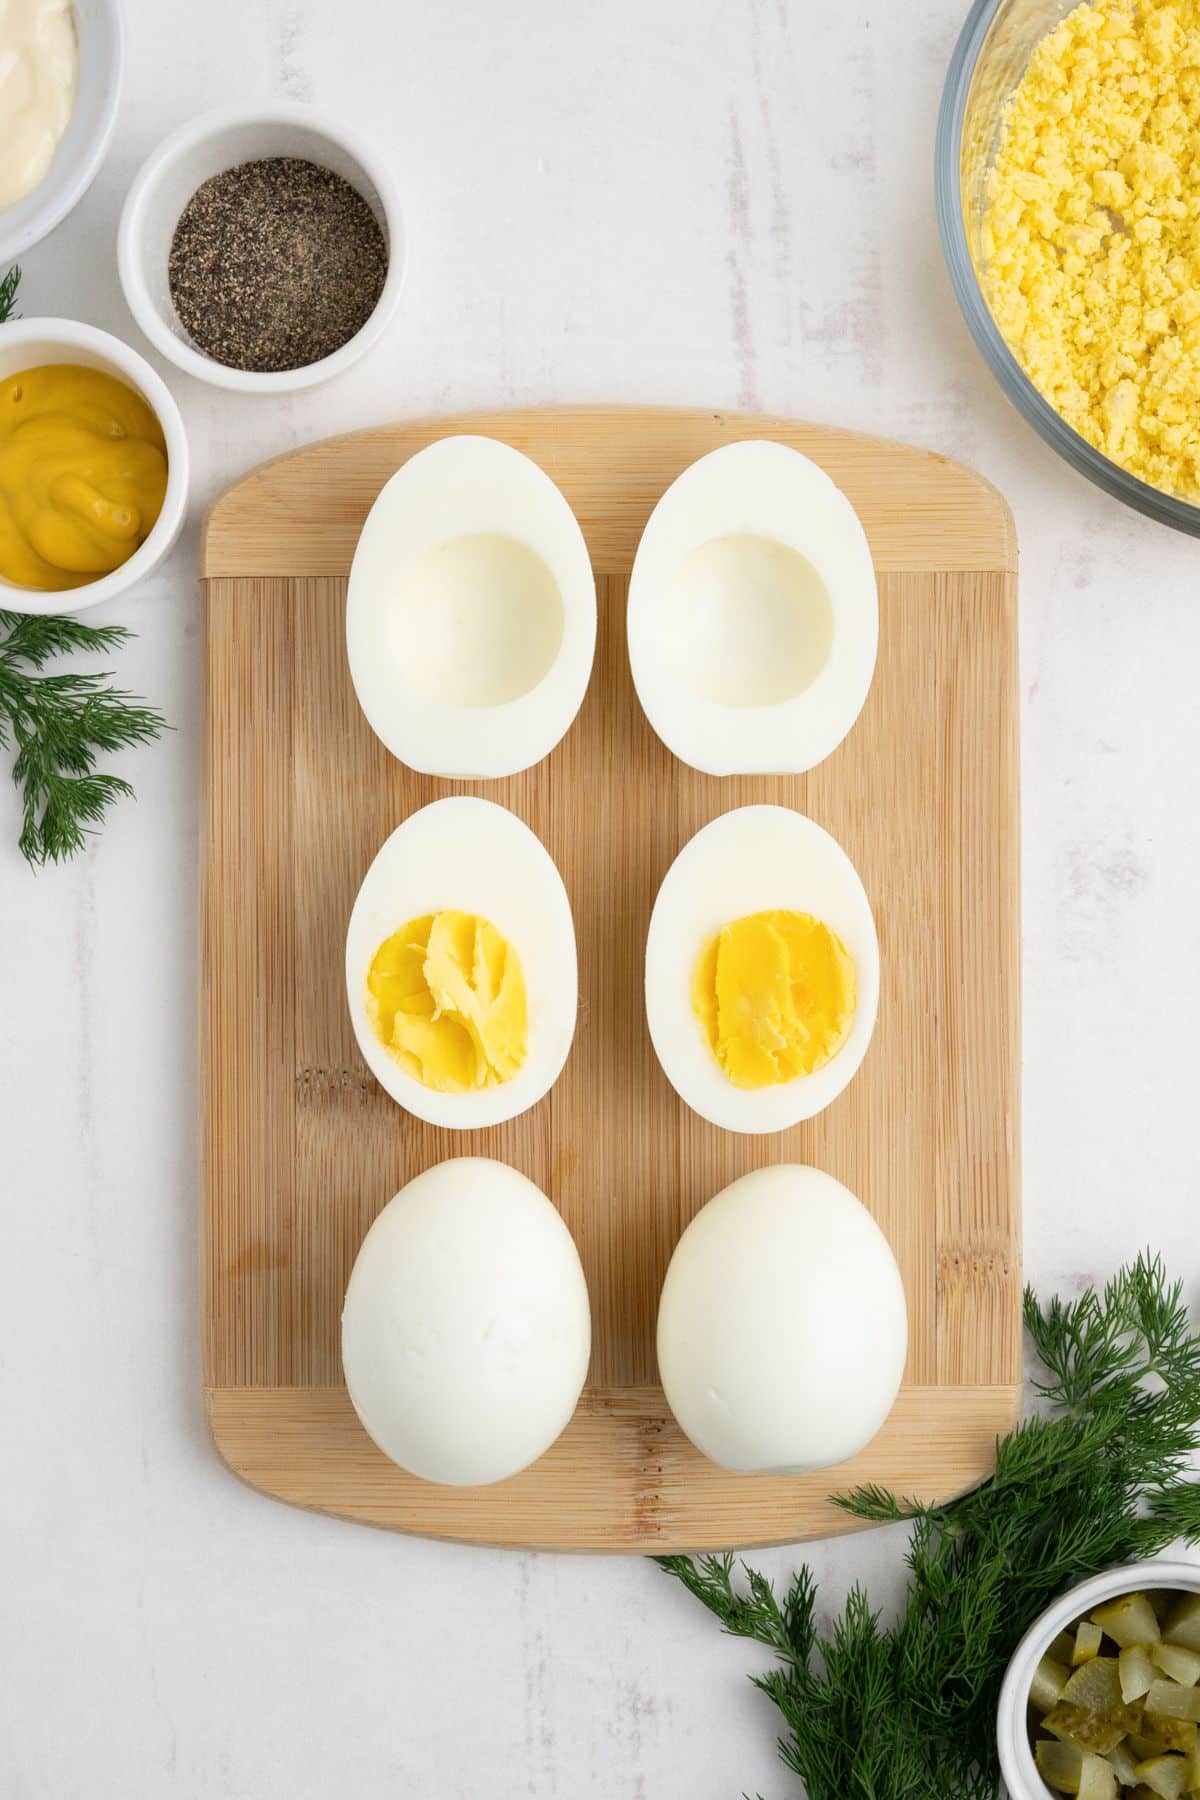 Eggs cut in half on a cutting board with some of the yolks removed.